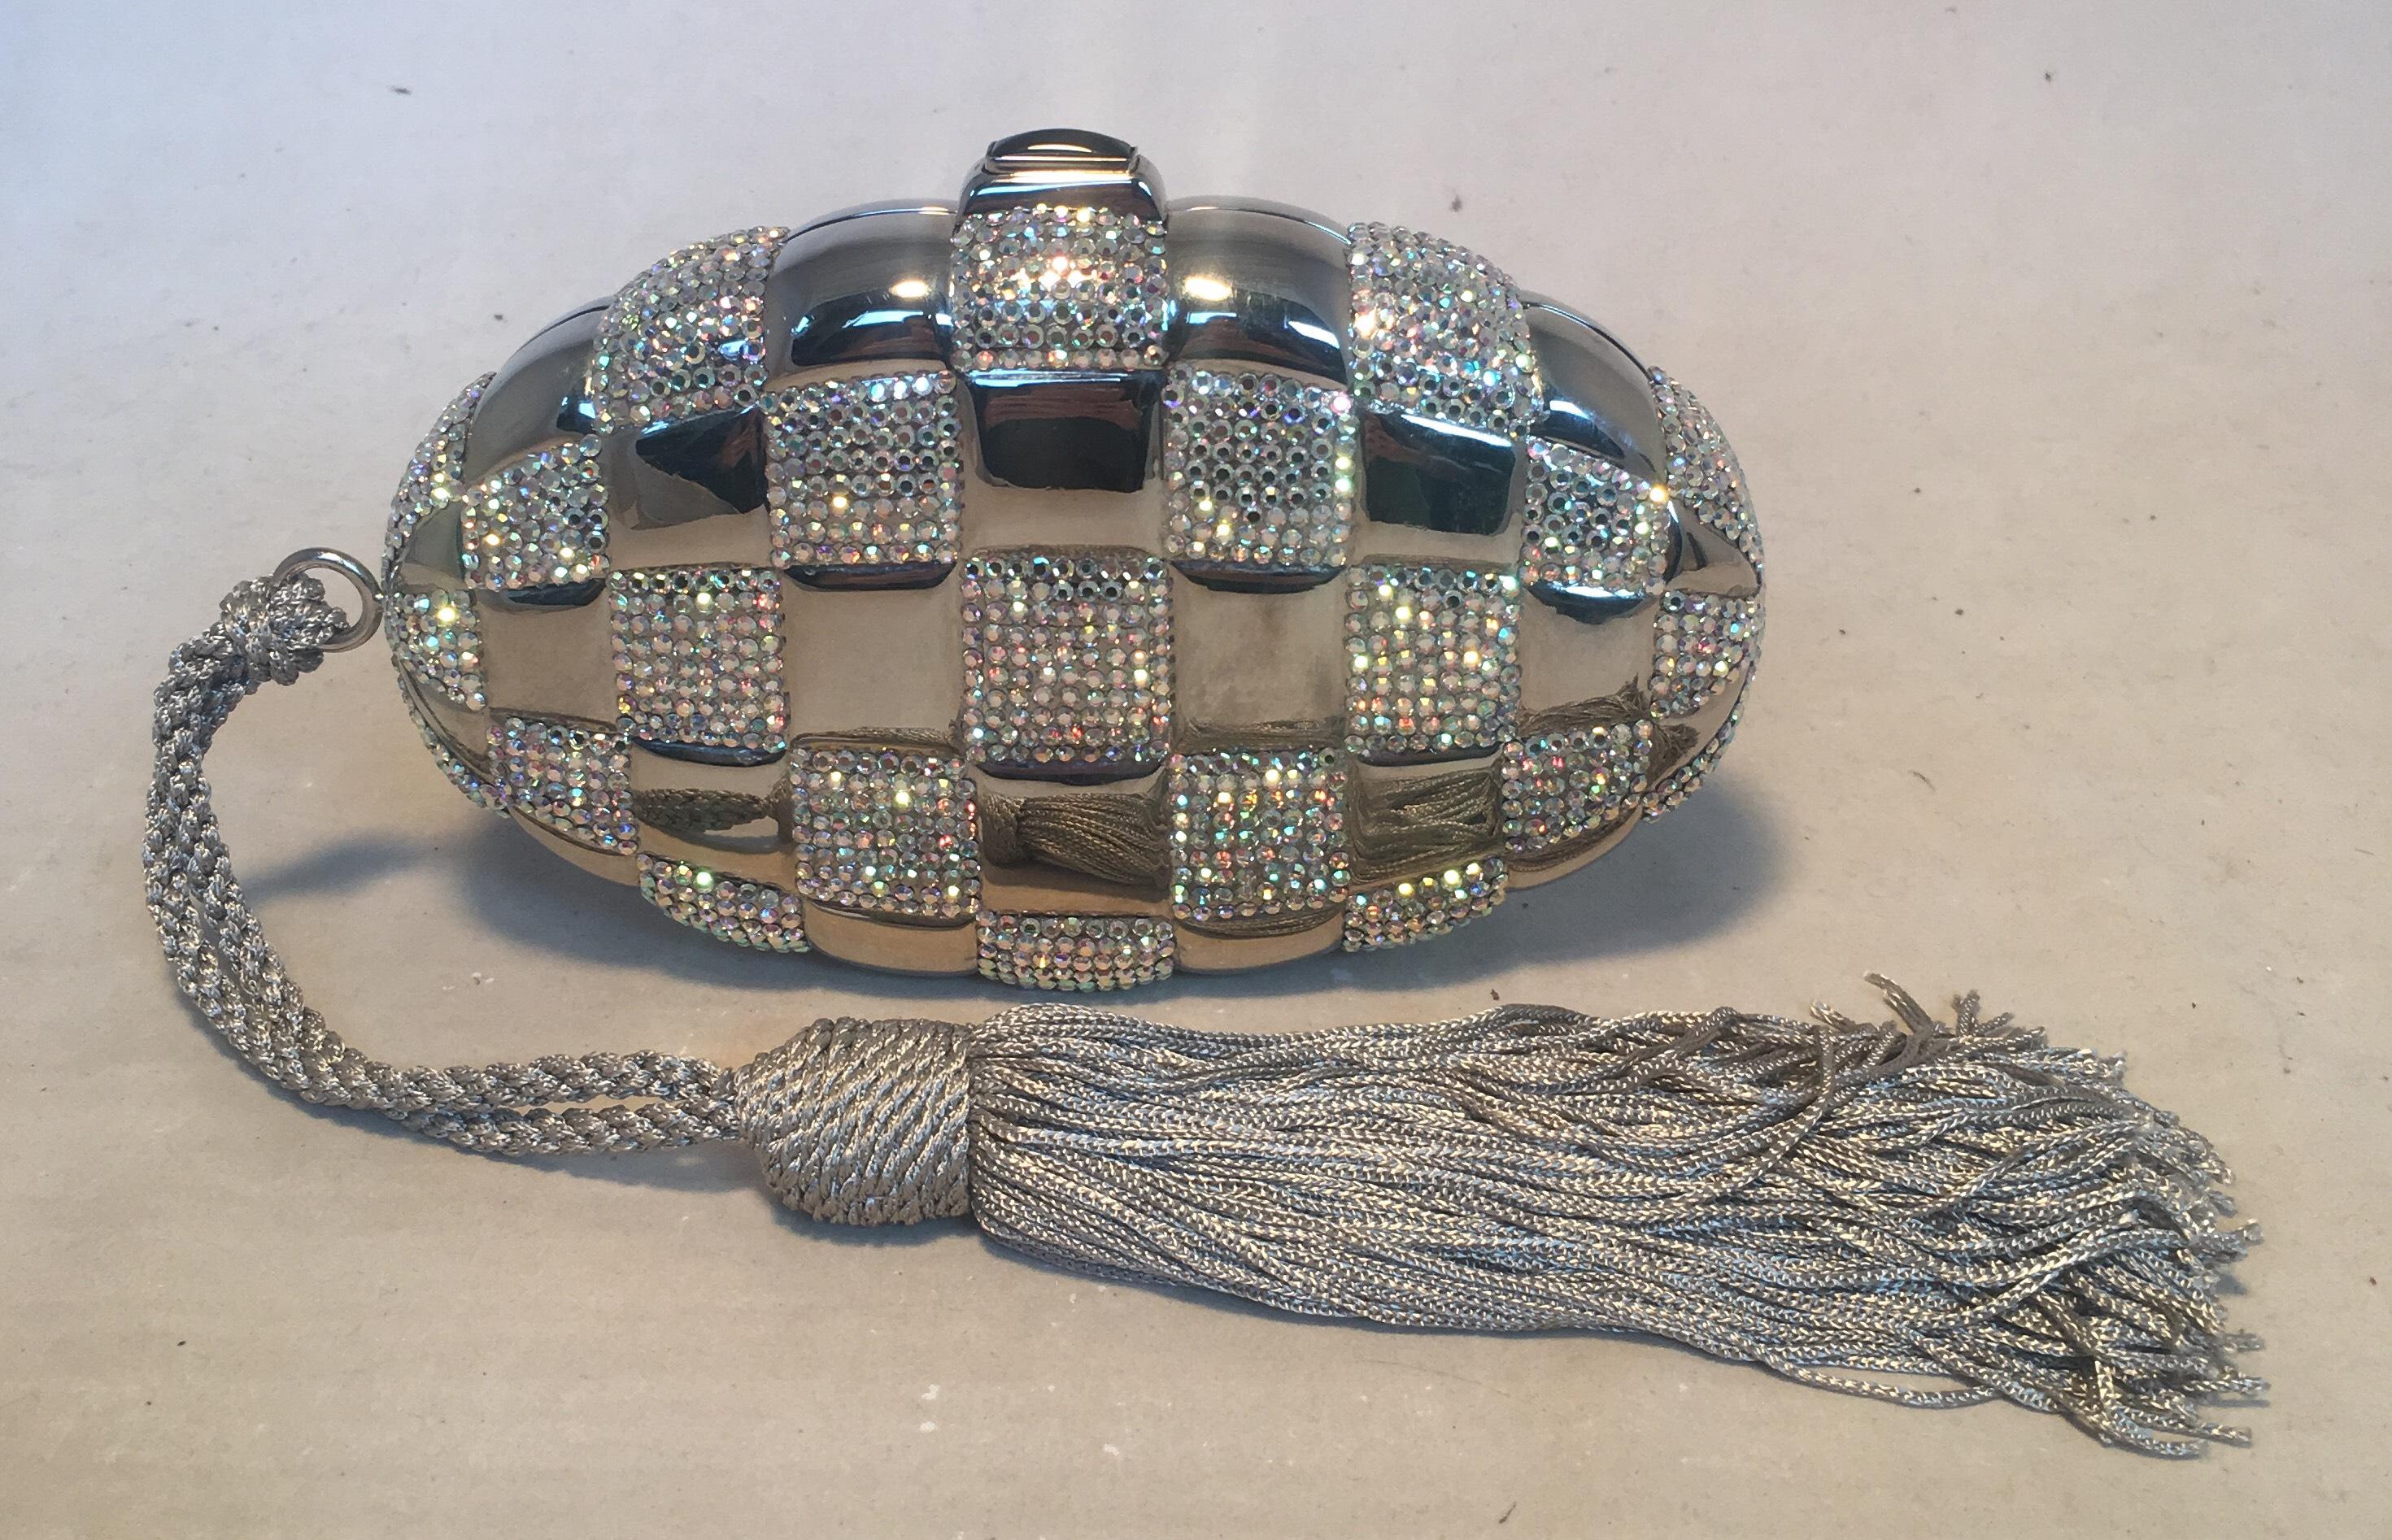 FABULOUS Judith Leiber Swarovski Crystal Checkered Grenade Minaudiere Evening Bag in excellent condition. Silver exterior body with iredecent Swarovski crystals in a checkered pattern throughout. Corded grey nylon rope tasseled handle to wear around